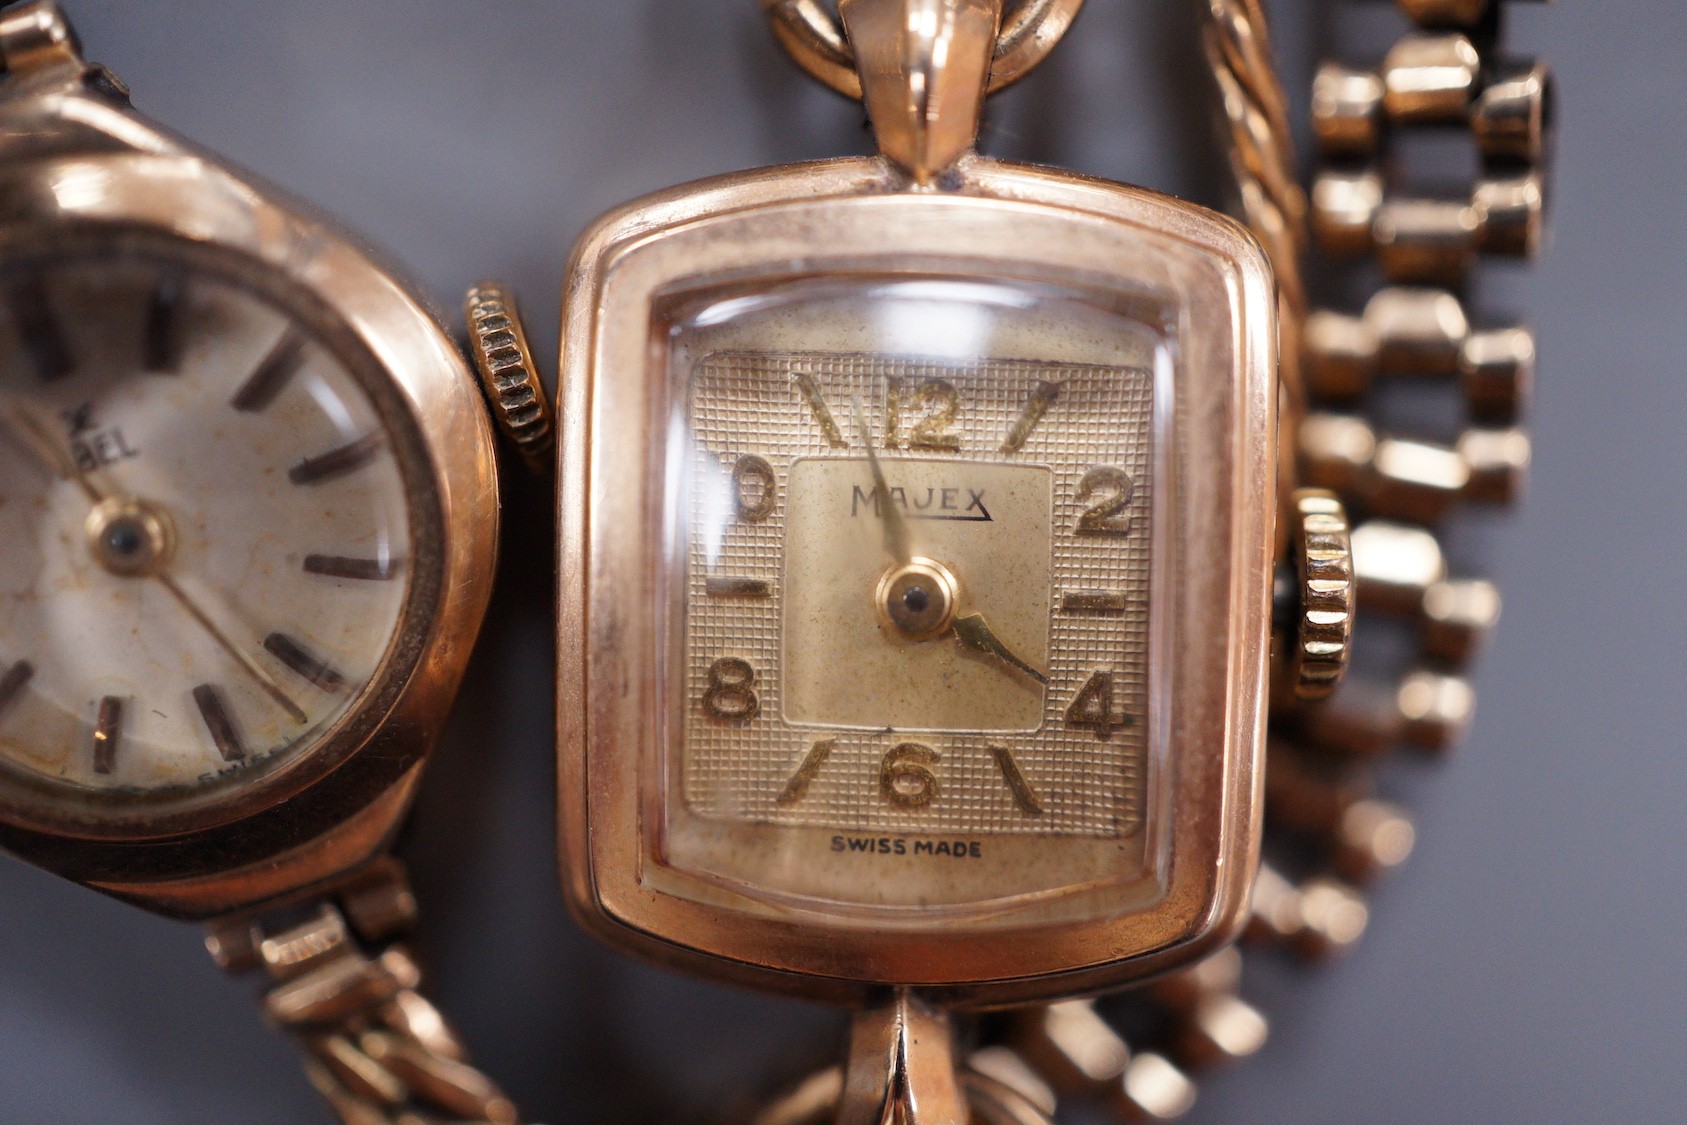 Two lady's 9ct gold manual wind wrist watches, Ebel & Majex, on 9ct bracelets, gross 25.6 grams and a lady's 9ct gold Regency manual wind wrist watch in a leather strap.